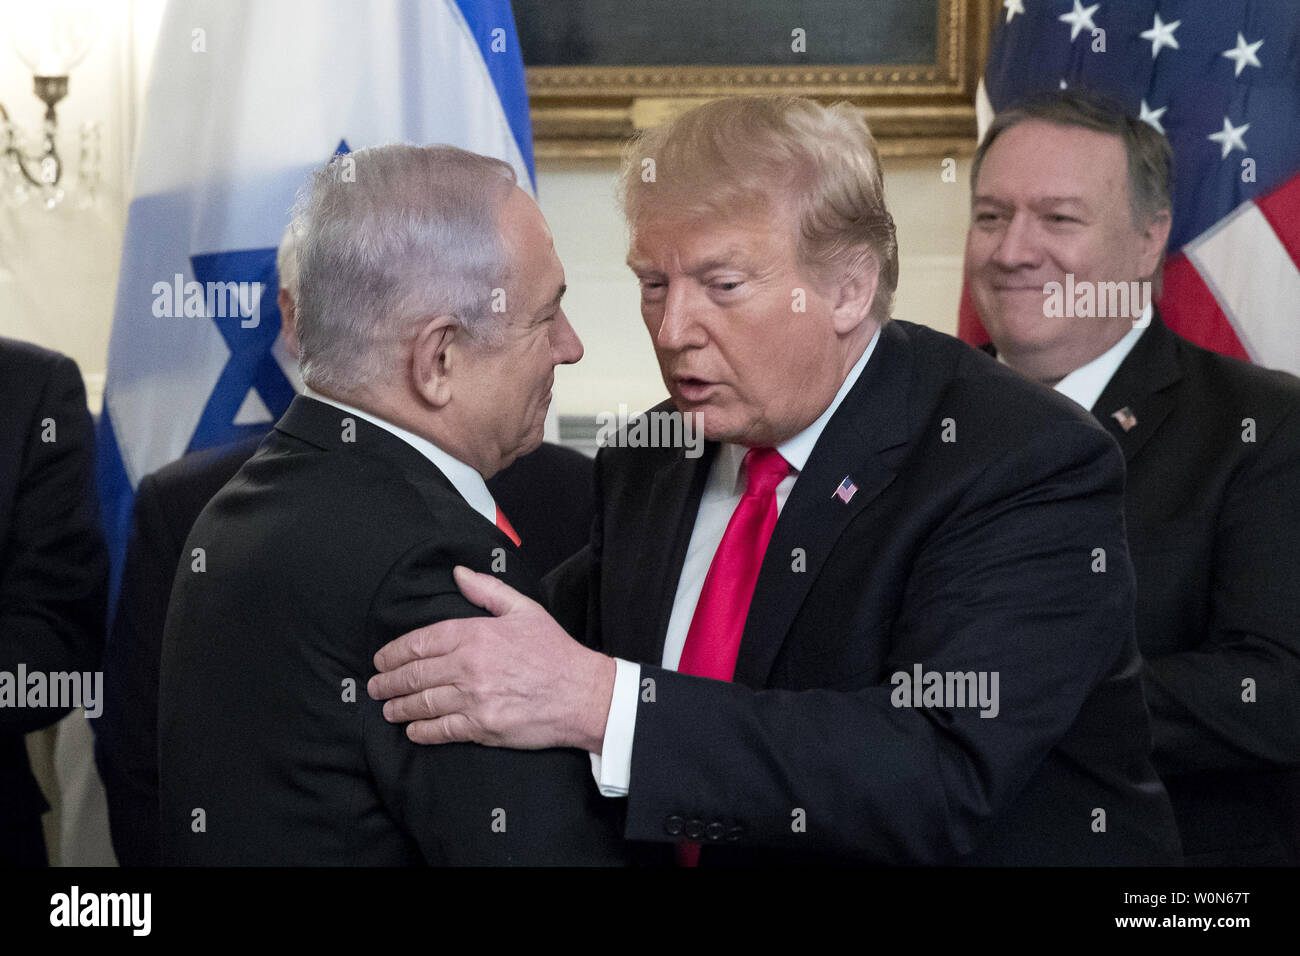 President Donald Trump is hugged by Israeli Prime Minister Benjamin Netayahu  after Trump signed an order recognizing the Golan Heights as Israeli territory  in the Diplomatic Reception Room of the White House in Washington, DC on March 25, 2019.     Photo by Michael Reynolds/UPI Stock Photo